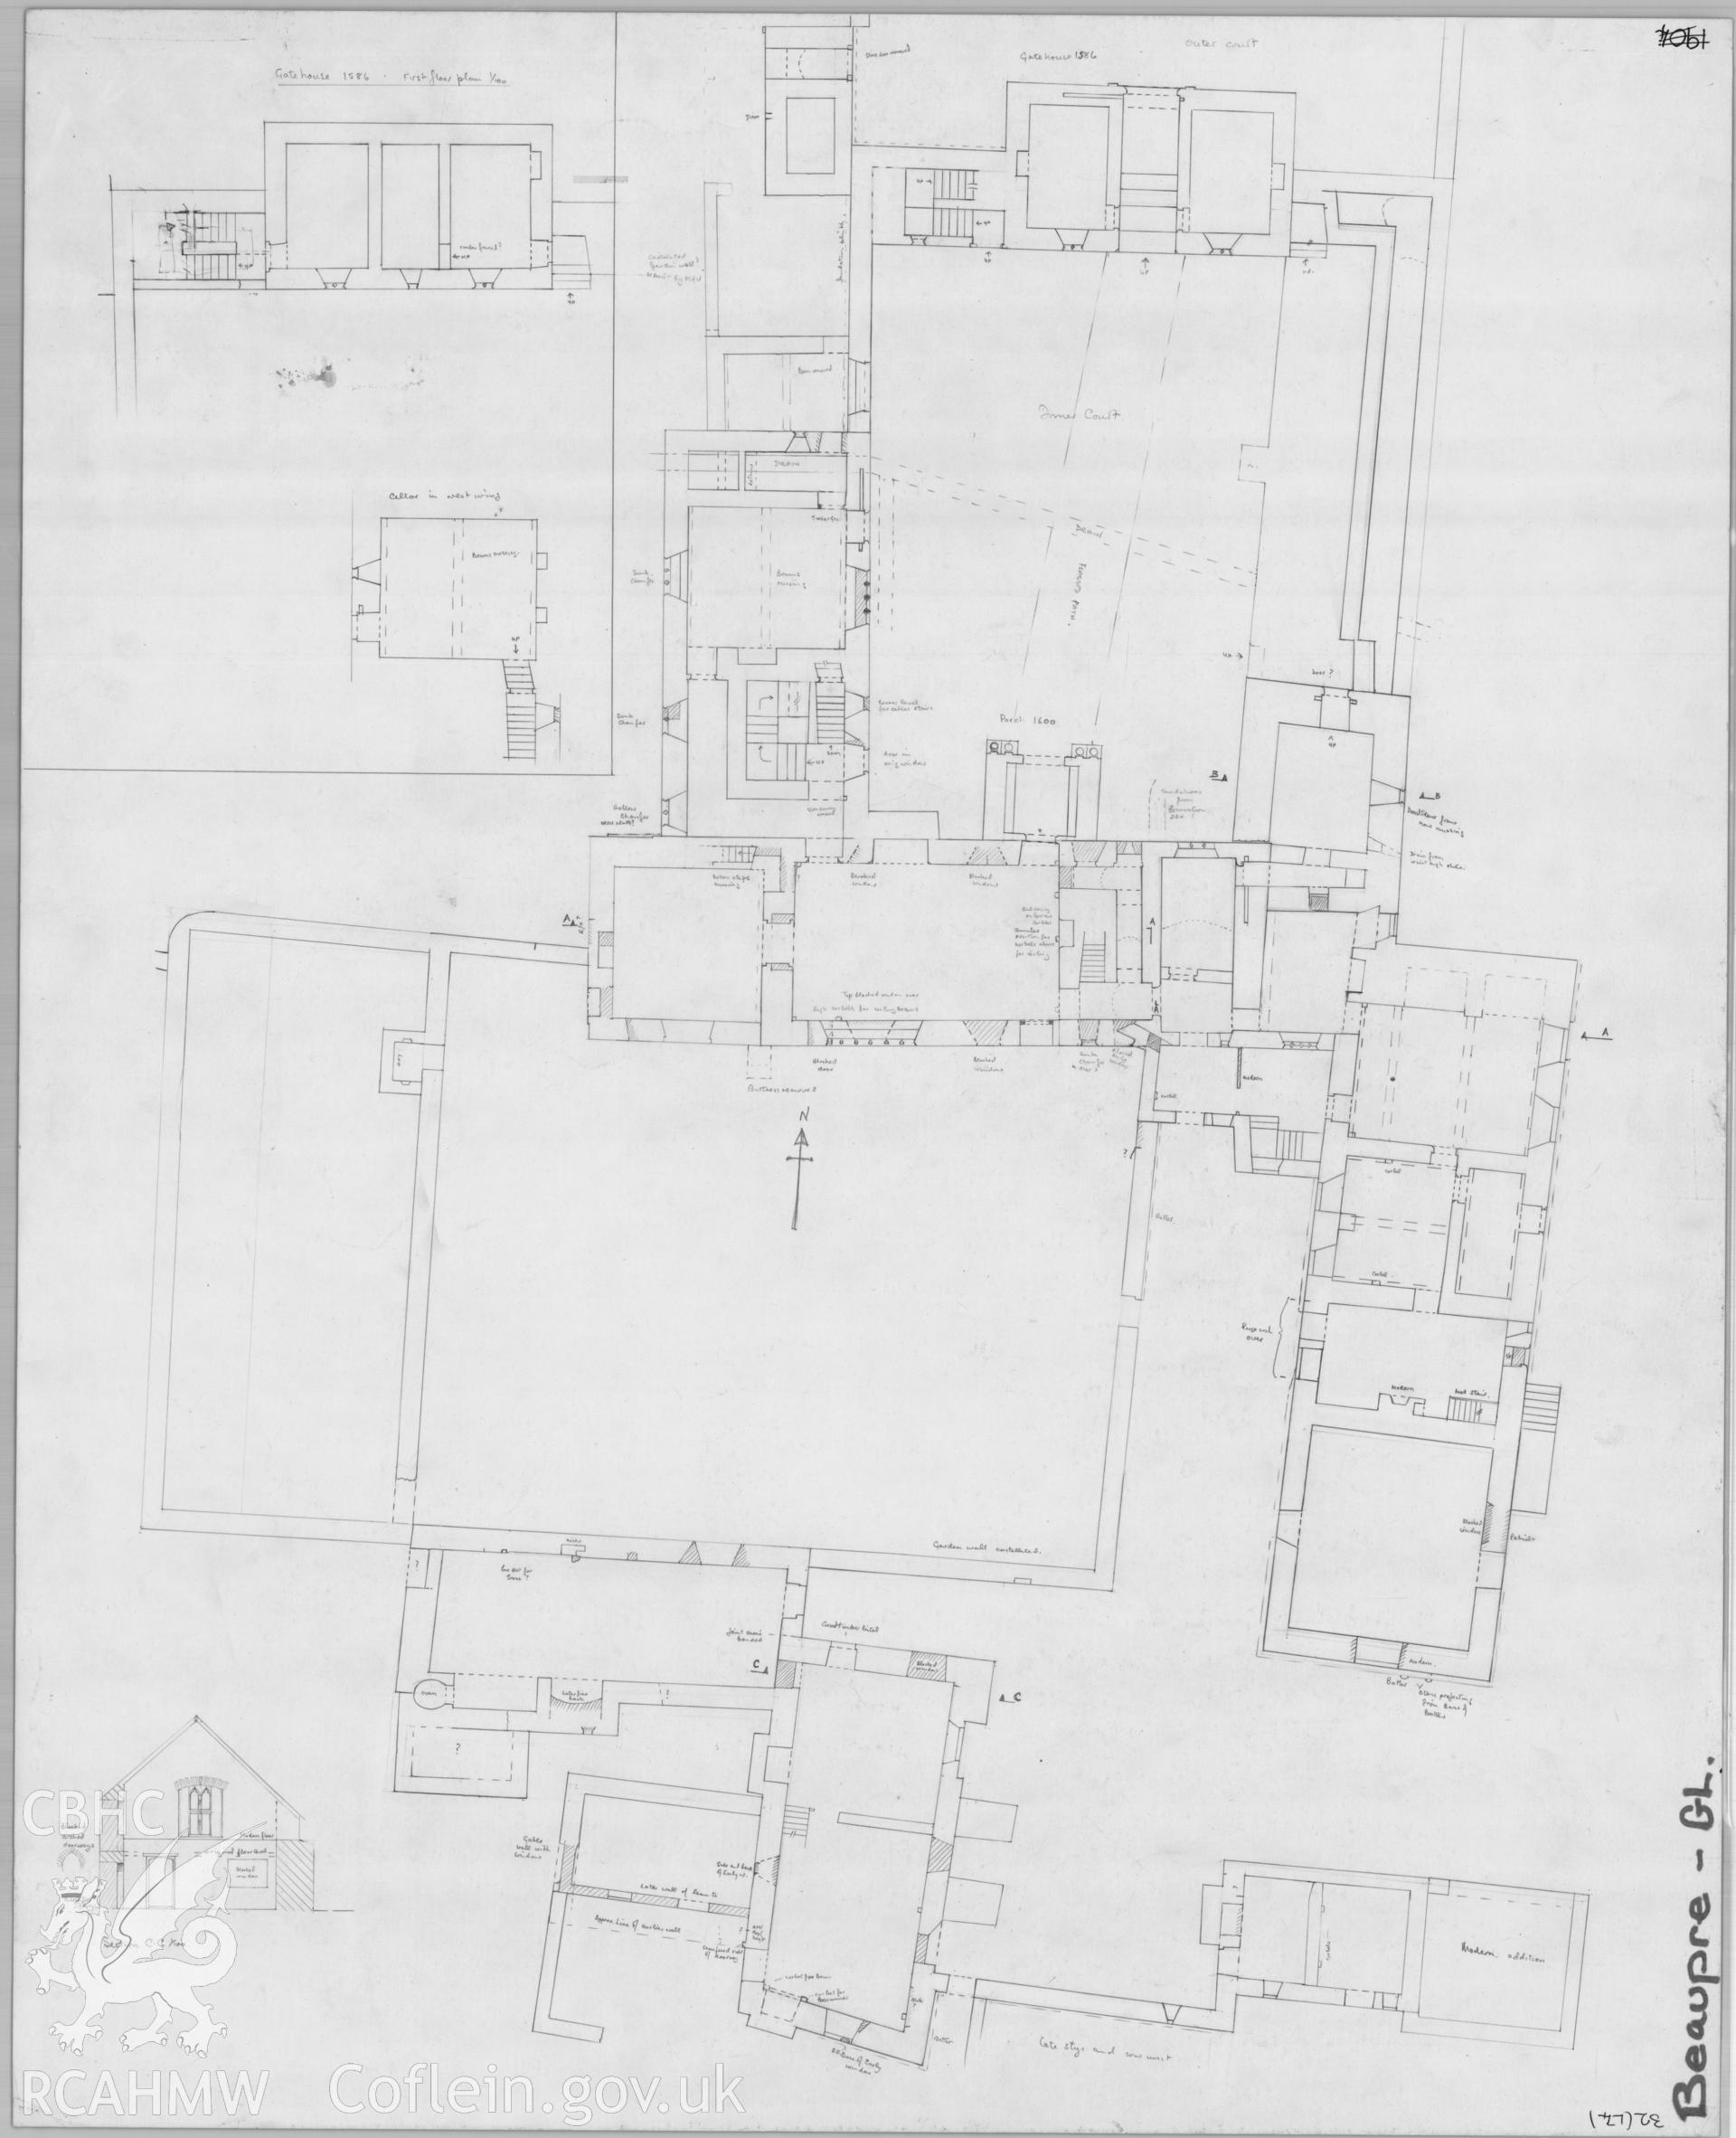 Measured pencil drawing showing plan and elevation view of Old Beaupre.